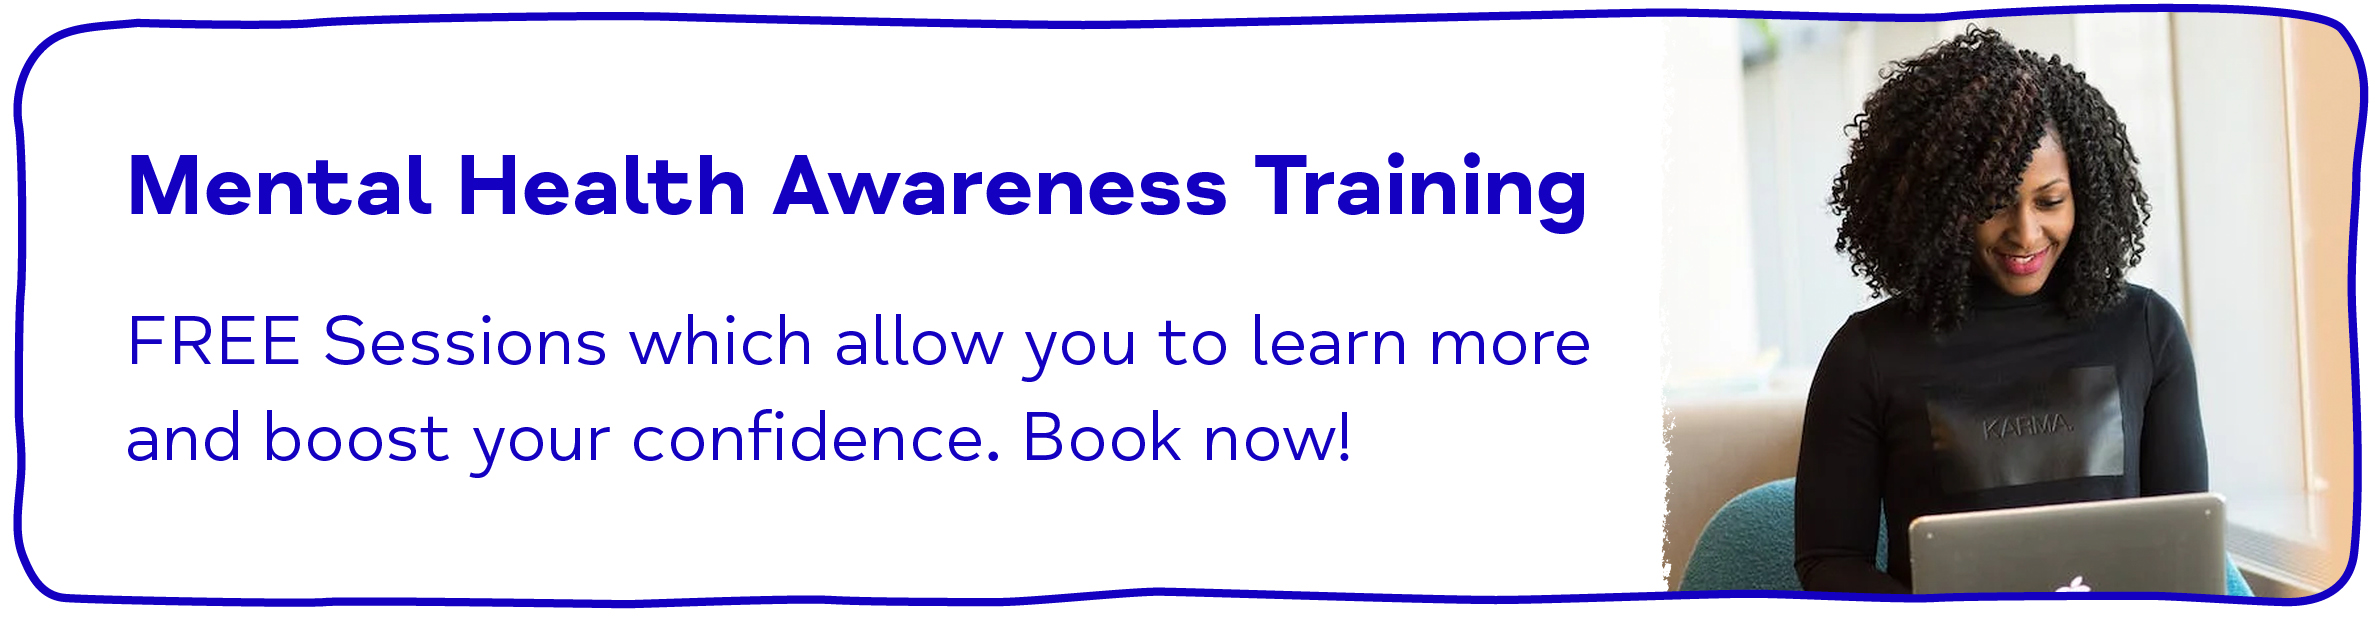 Mental Health Awareness Training FREE Sessions which allow you to learn more and boost your confidence. Book now!